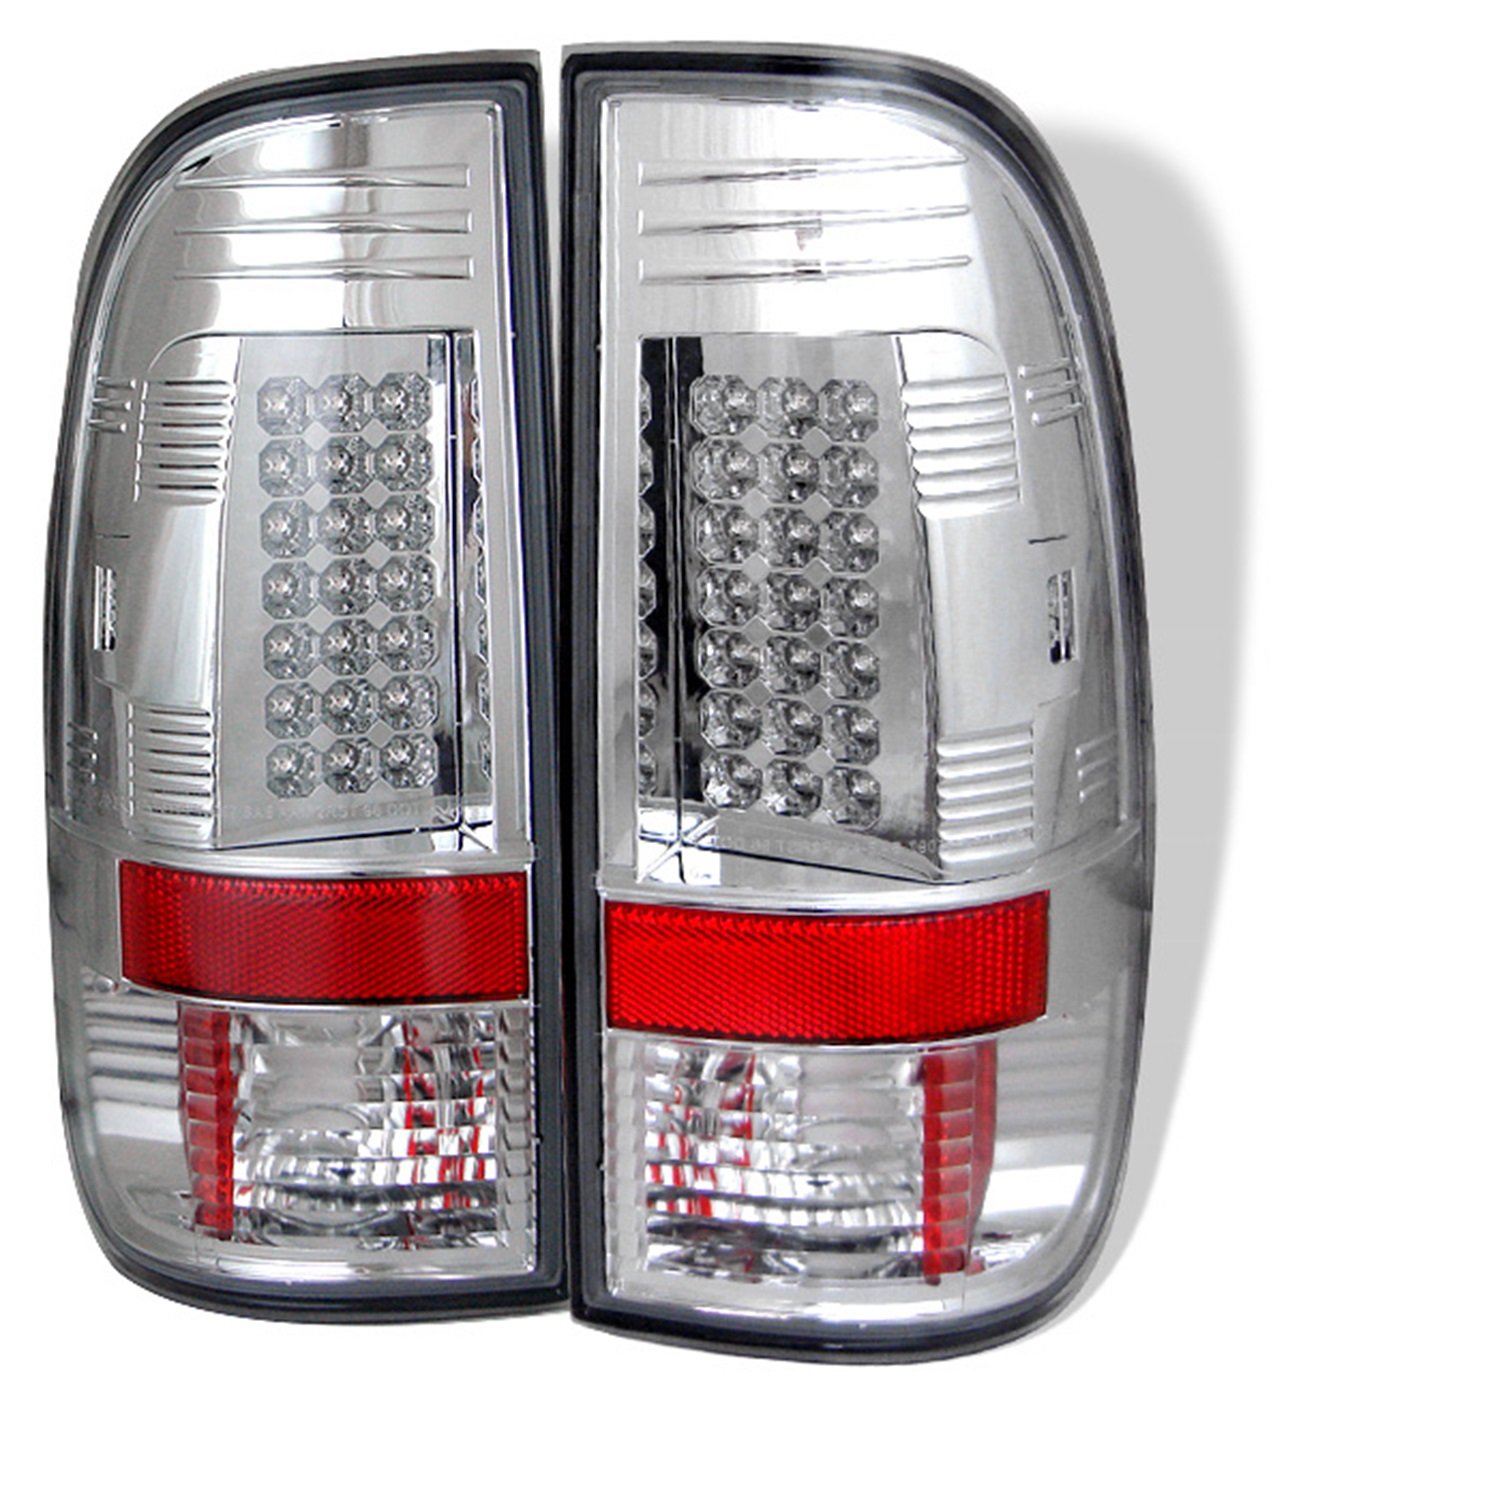 9703 F150 STYLESIDE/ 9907 F250/350/450/550 SUPER DUTY LED TAIL LIGHTSCHROME